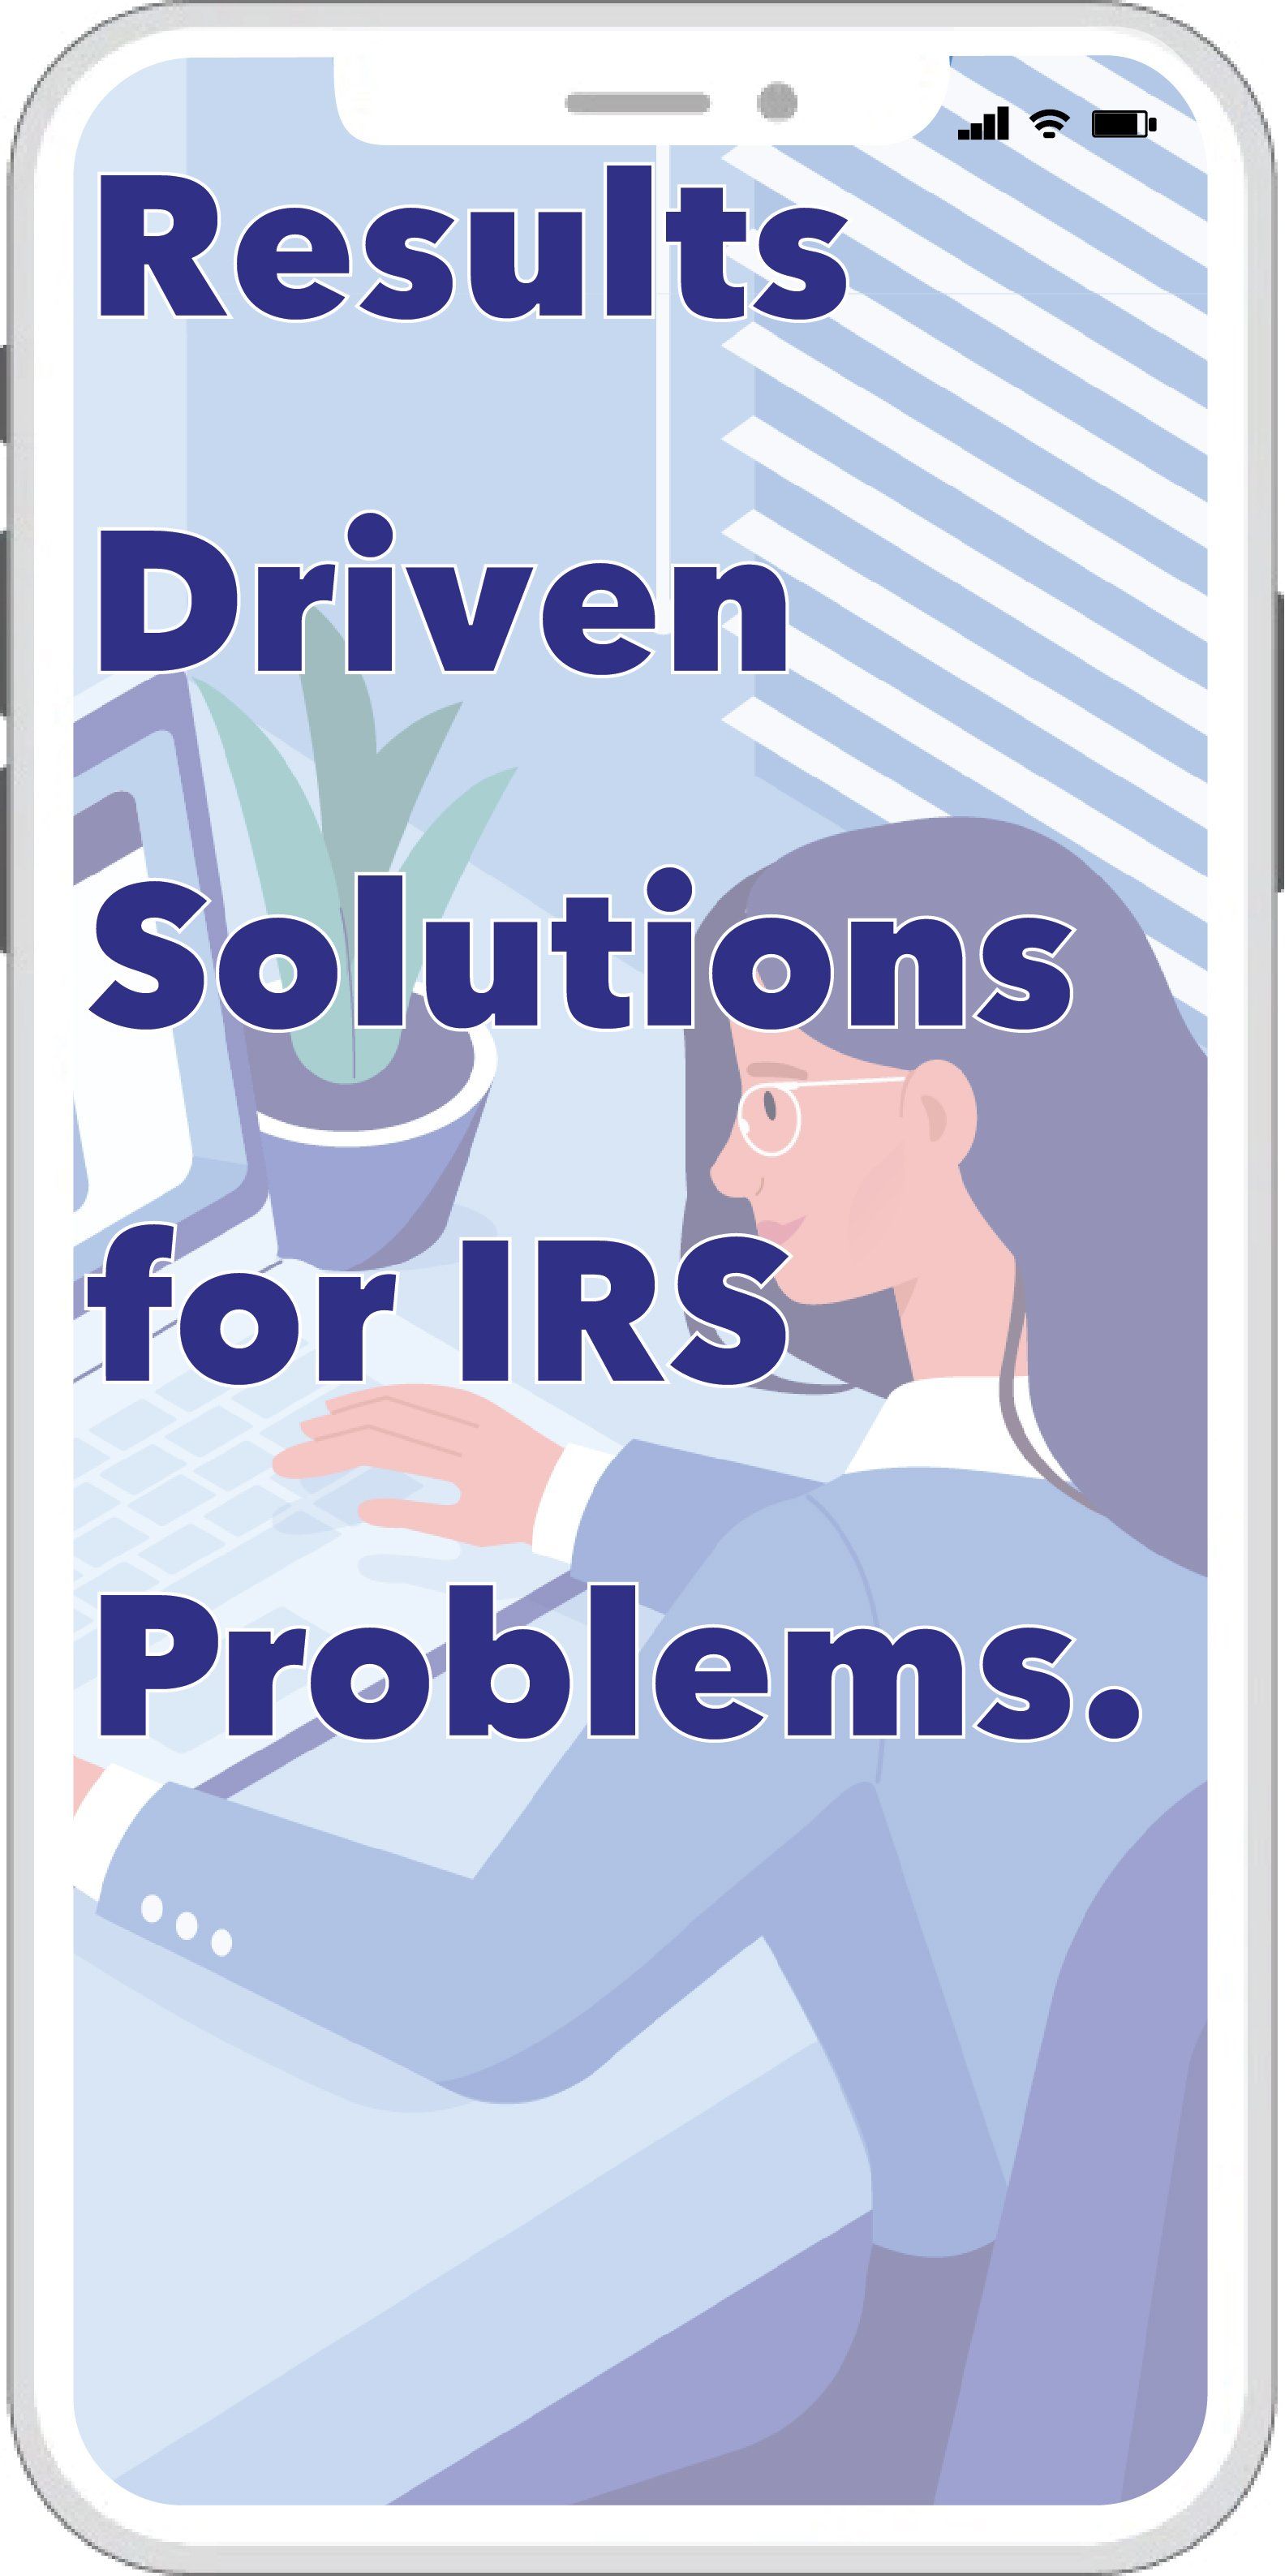 Solutions for IRS problems